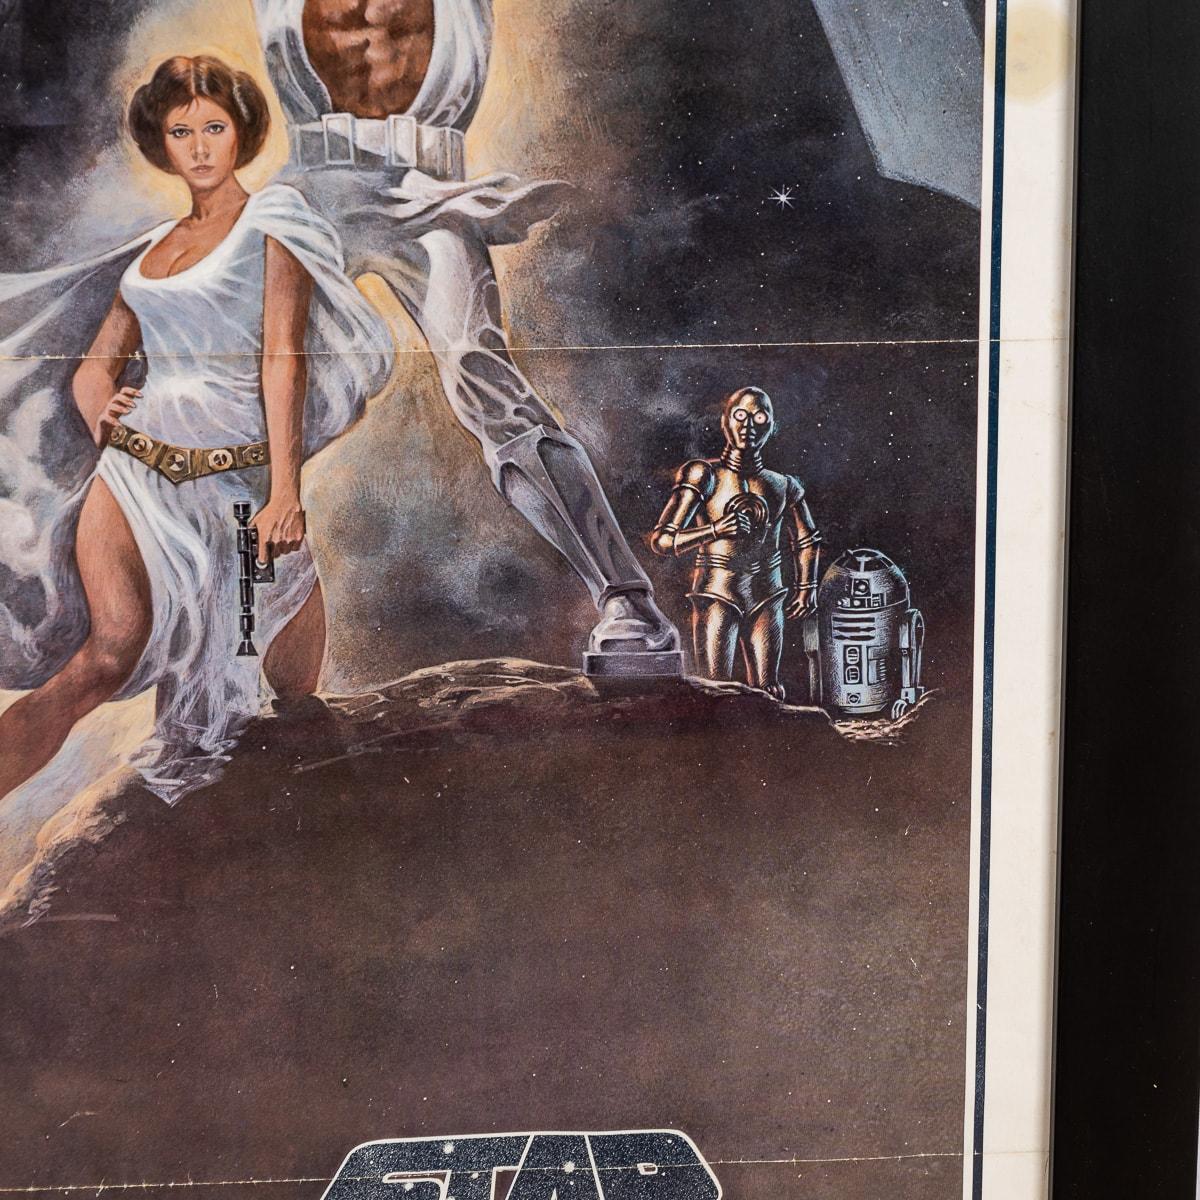 Original U.S. Release Star Wars 'A New Hope' Style A Poster 77/21 c.1977 For Sale 4